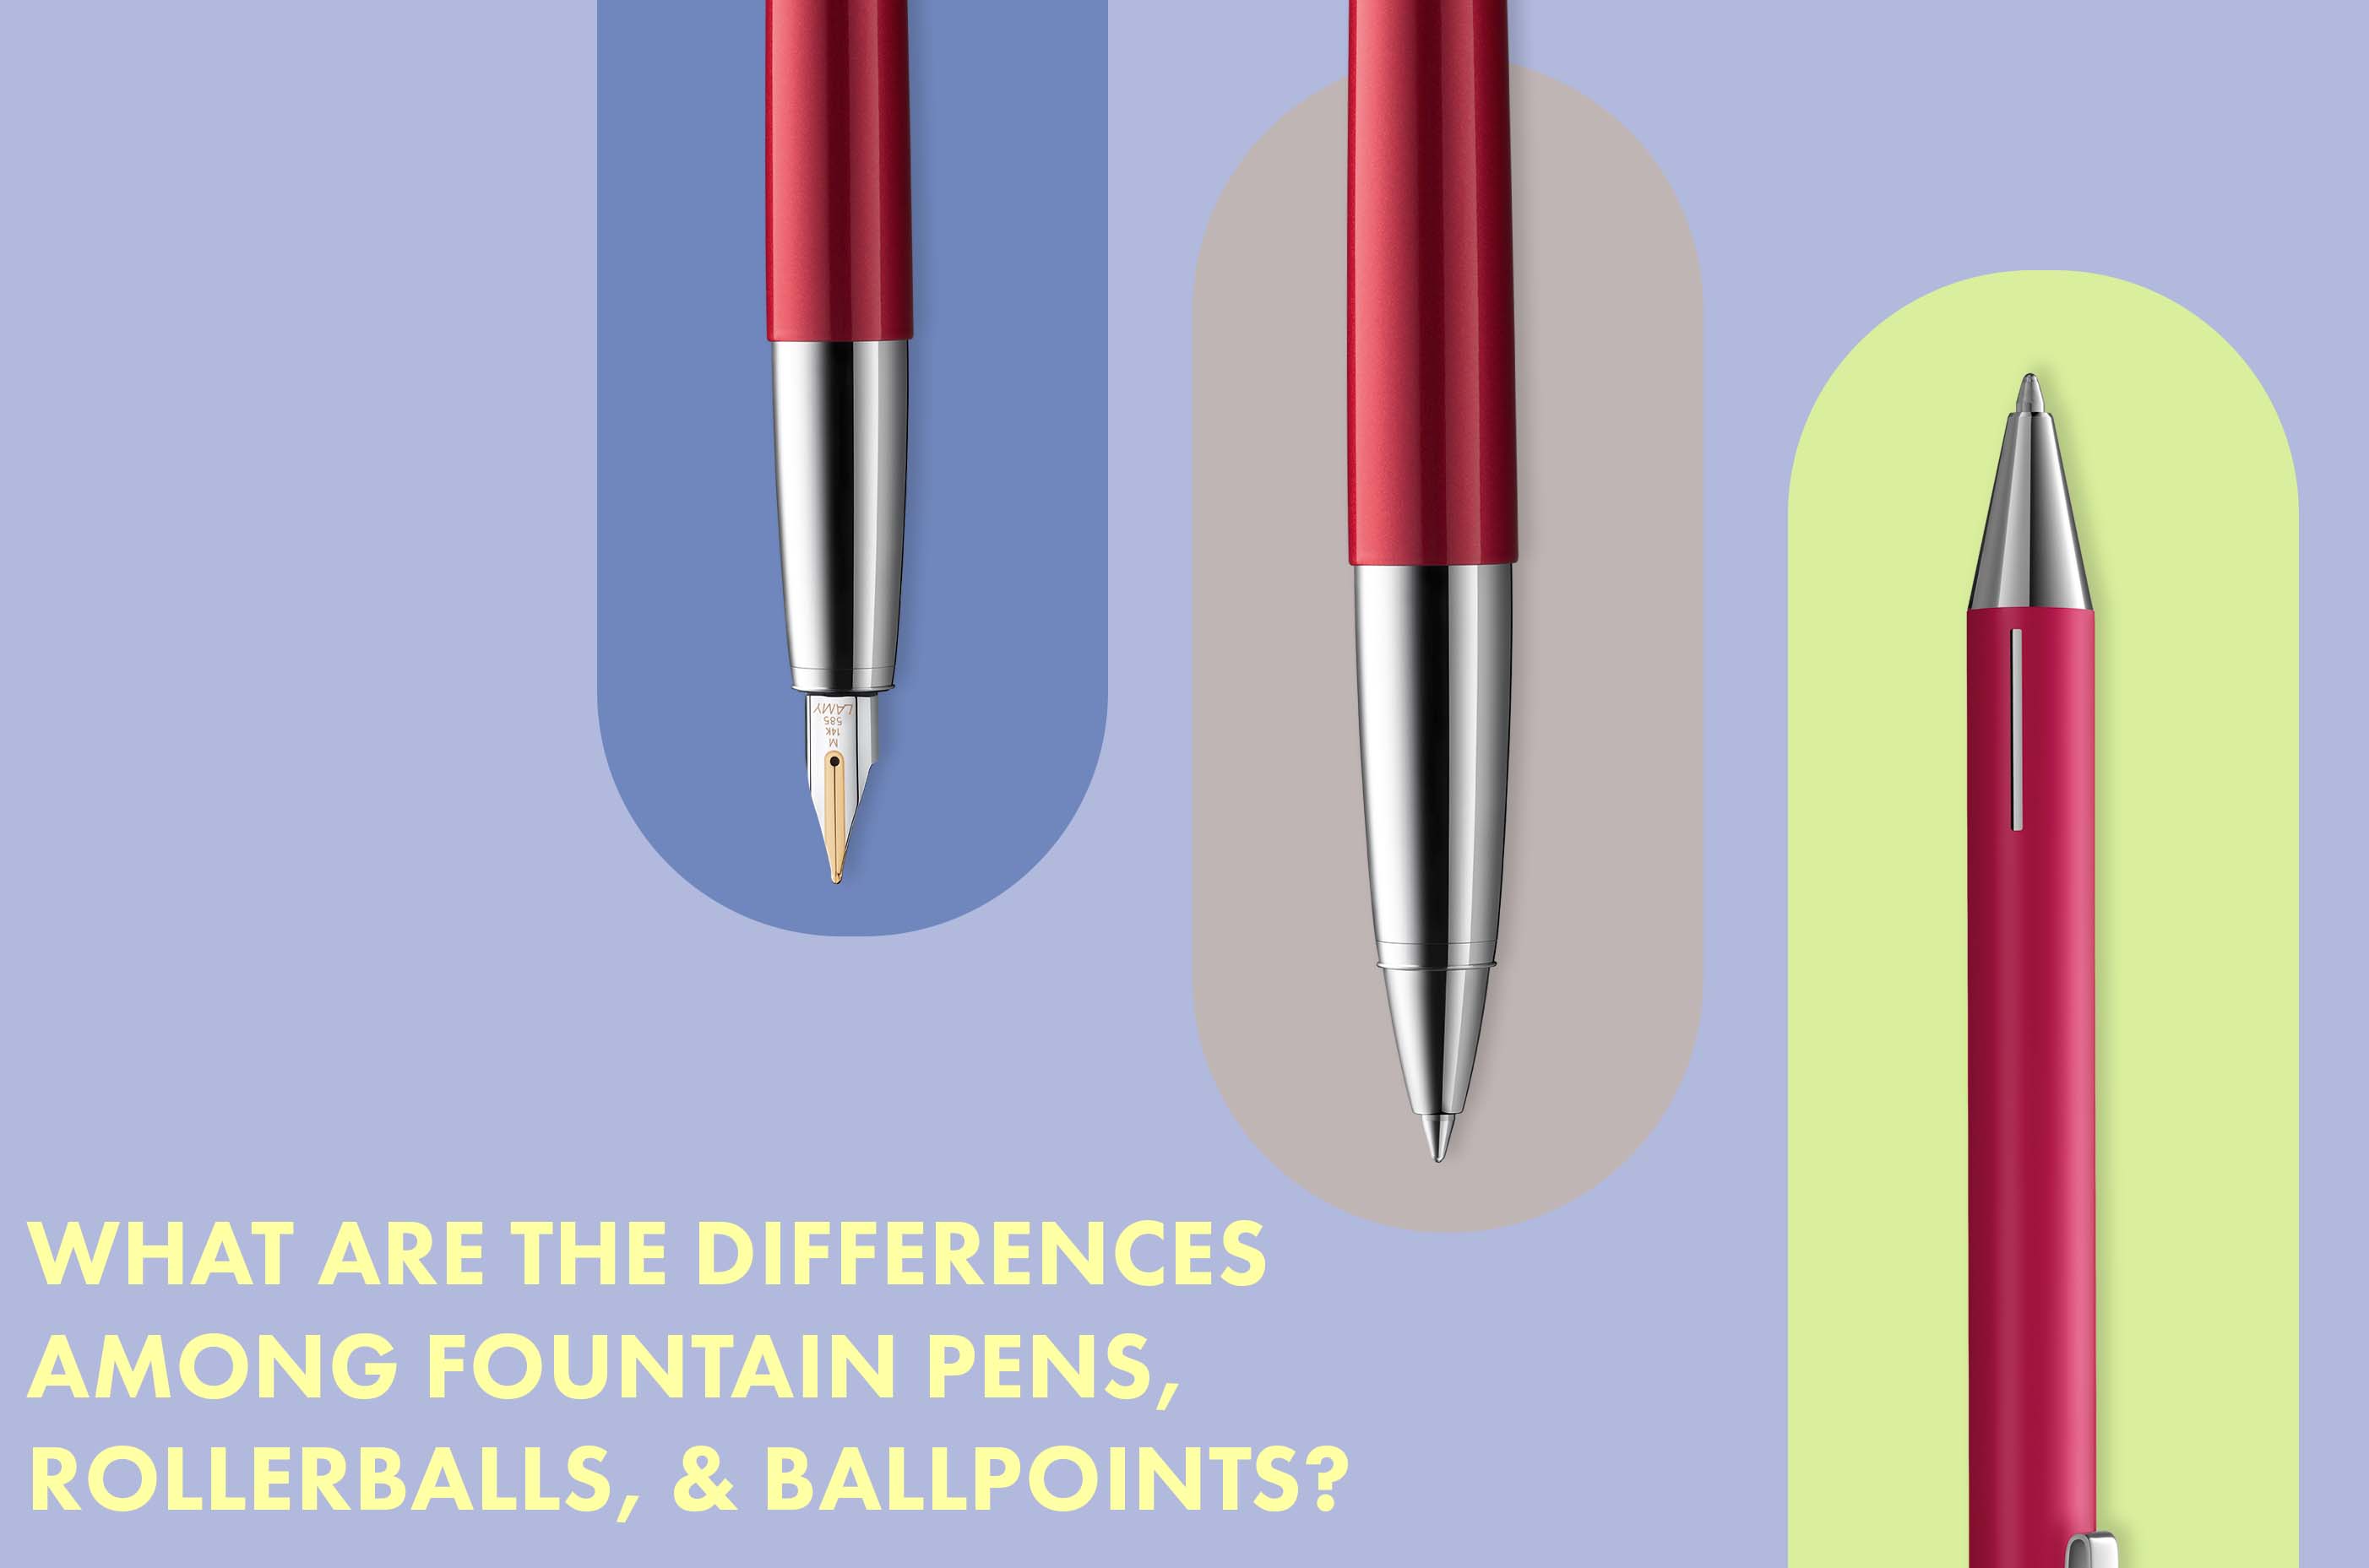 What Are The Differences Among Fountain Pens, Rollerballs, & Ballpoints?